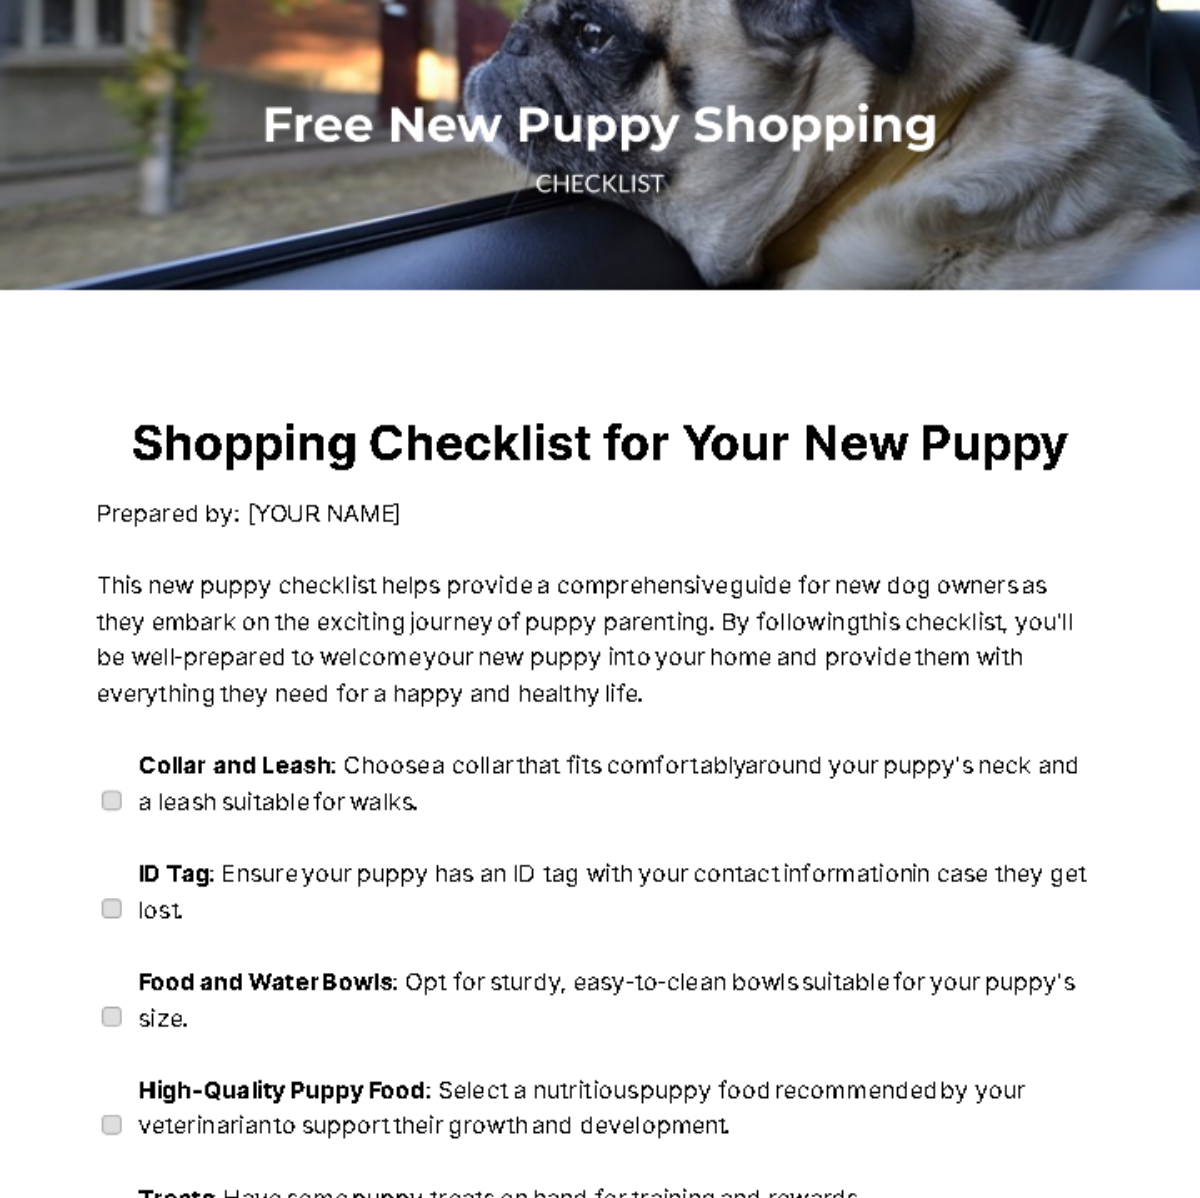 Free New Puppy Shopping Checklist Template